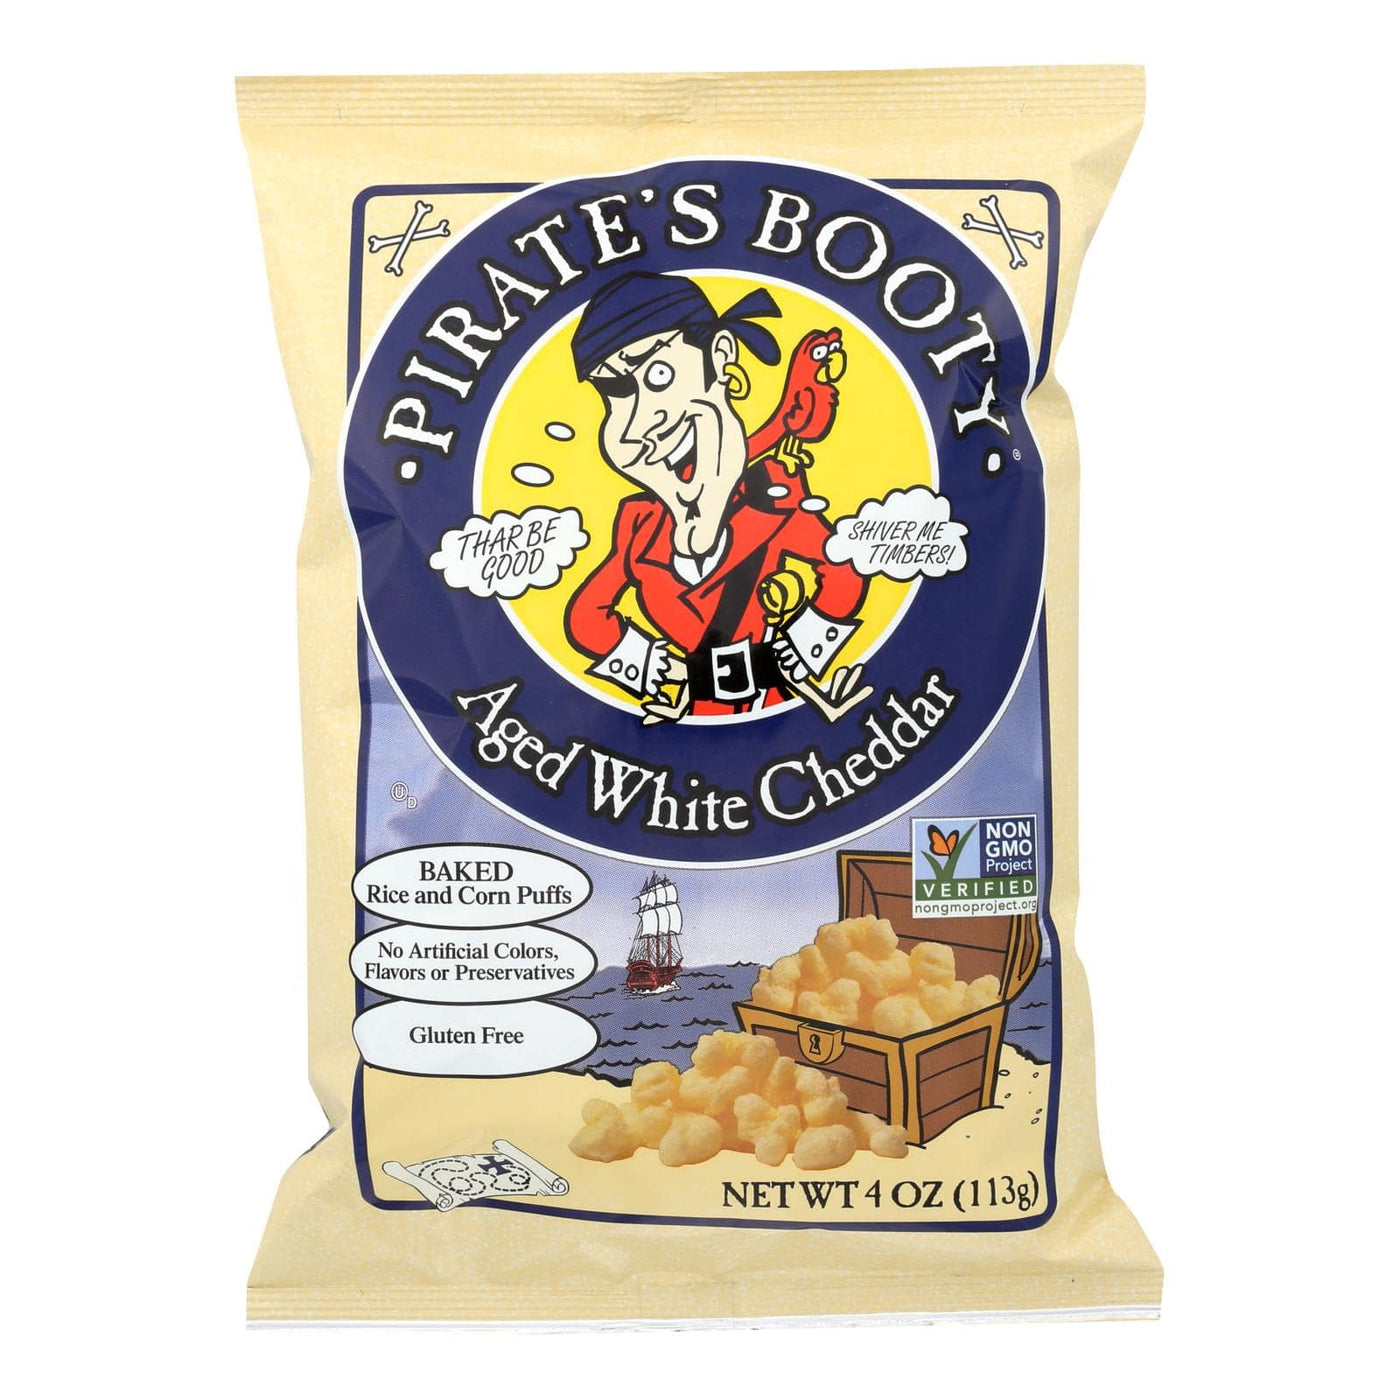 Buy Pirate Brands Booty Puffs - Aged White Cheddar - Case Of 12 - 4 Oz.  at OnlyNaturals.us